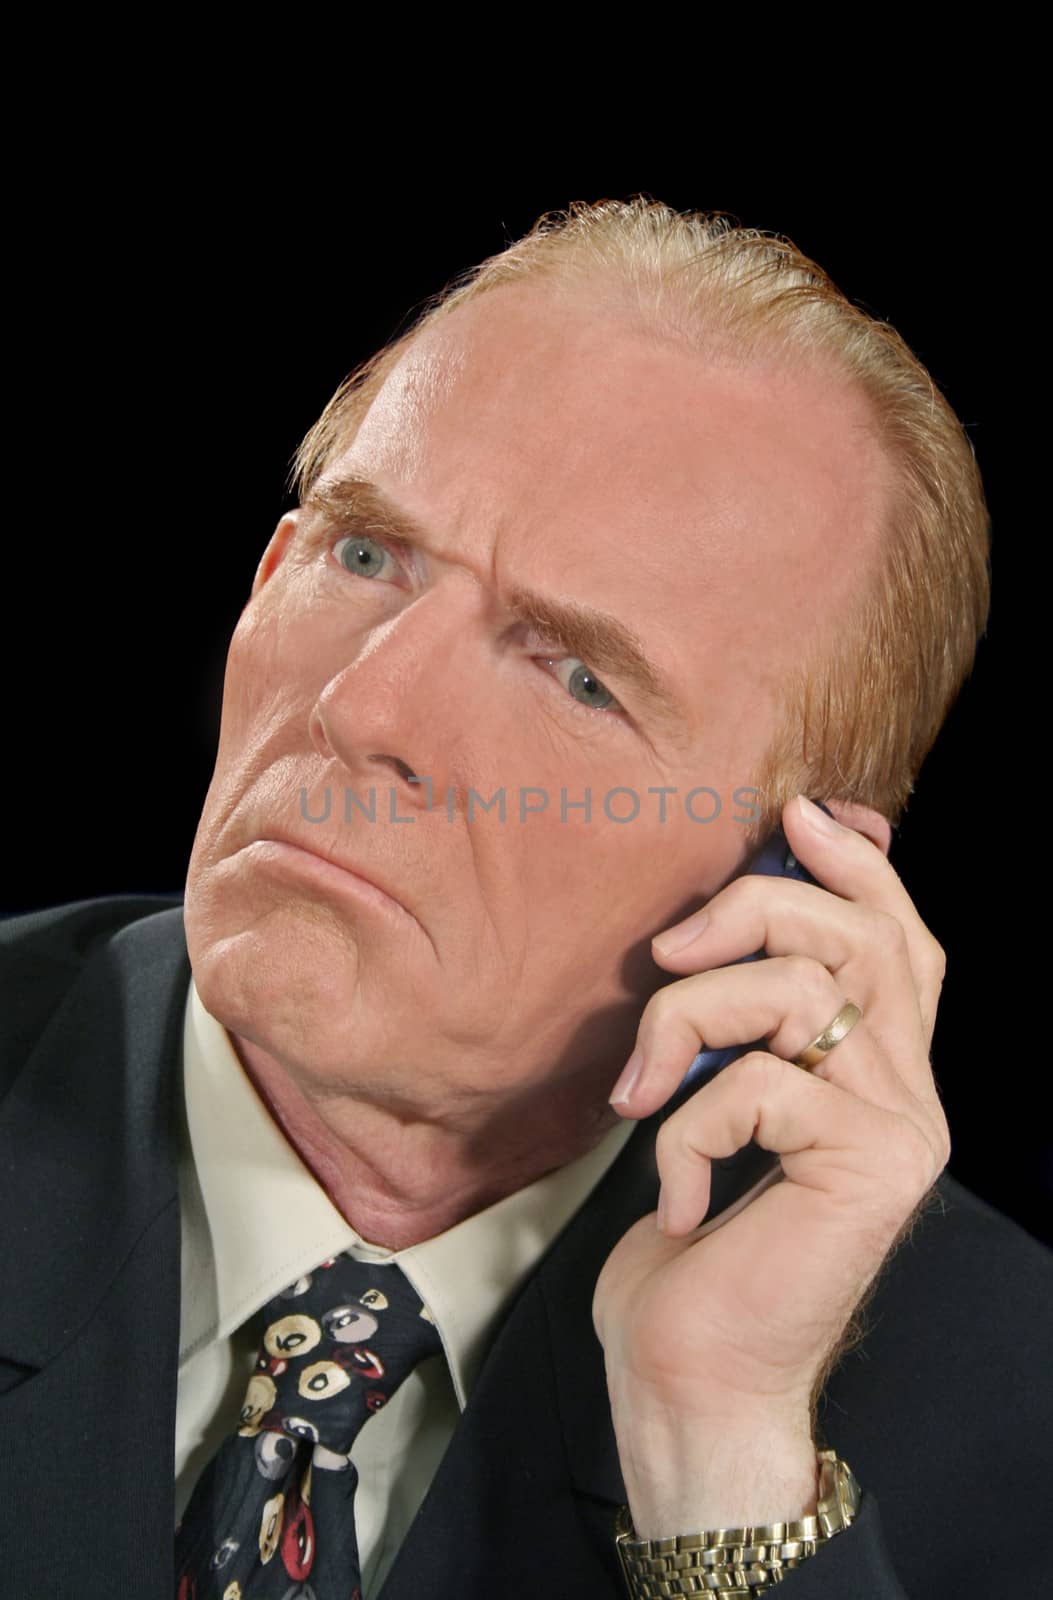 Perplexed businessman takes a confusing phone call.